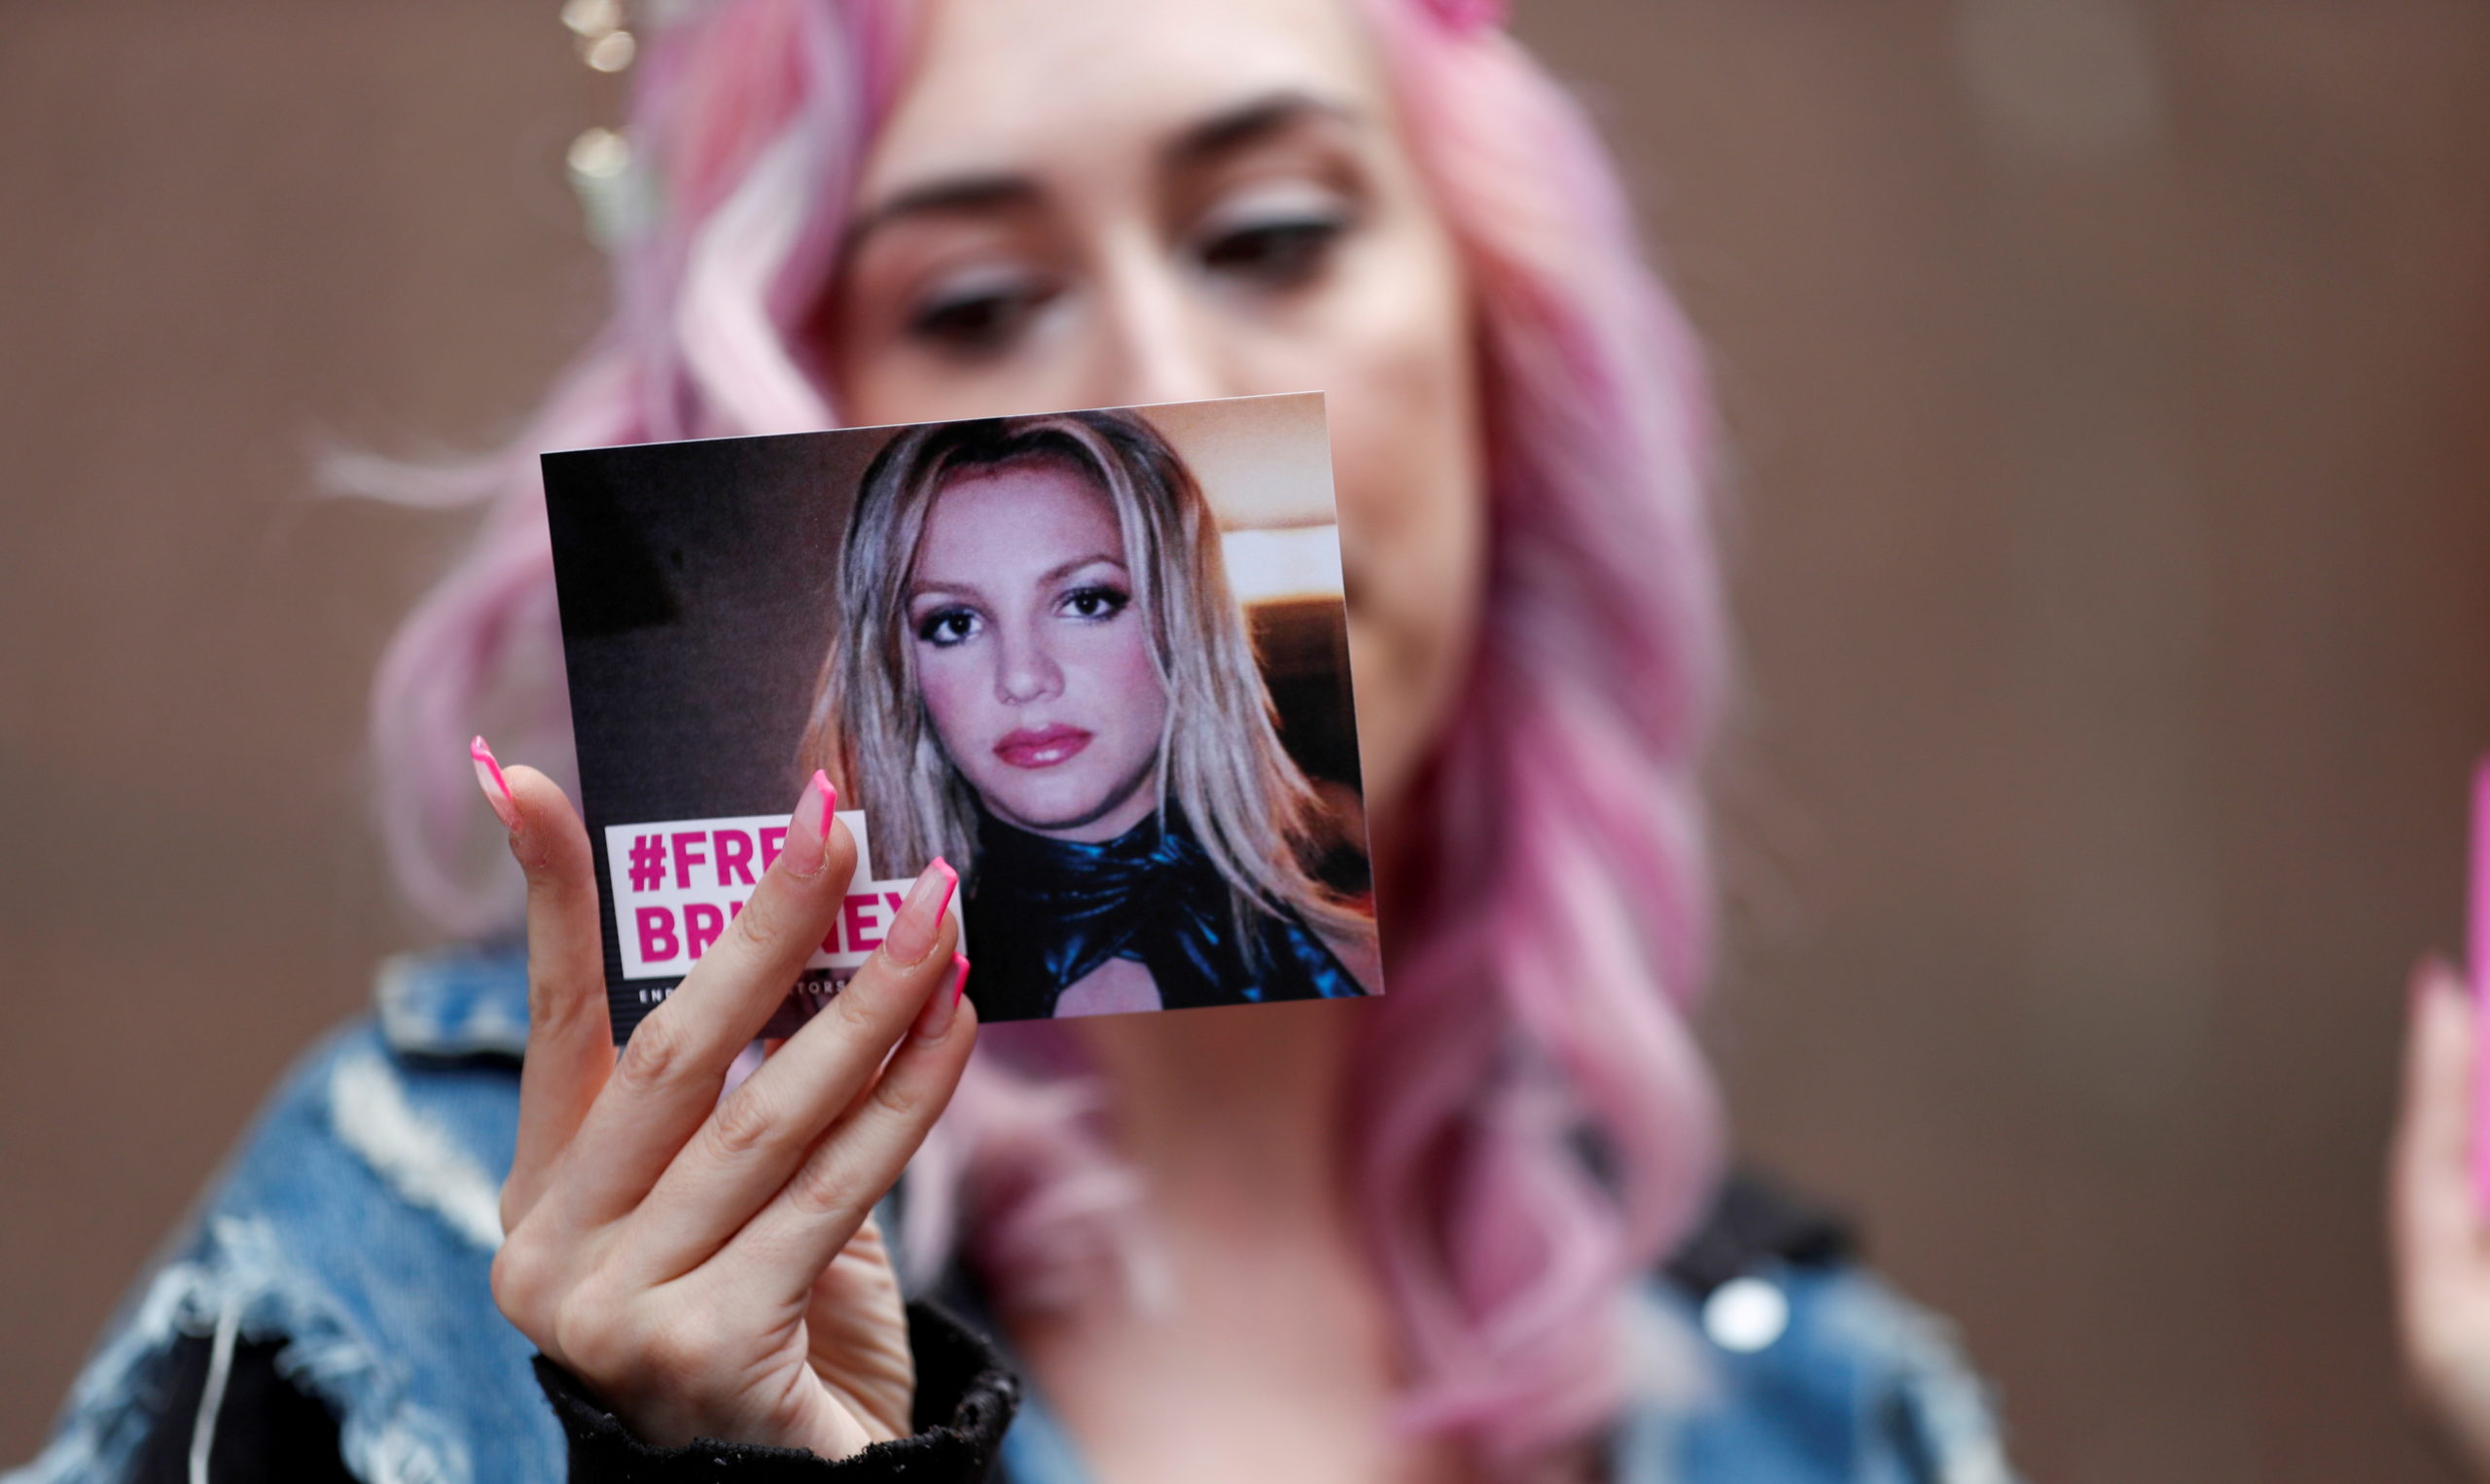 Supporter of pop star Britney Spears Melanie Mandarano holds a postcard on the day of a conservatorship case hearing at Stanley Mosk Courthouse in Los Angeles, California, U.S., July 26, 2021.  REUTERS/Mario Anzuoni